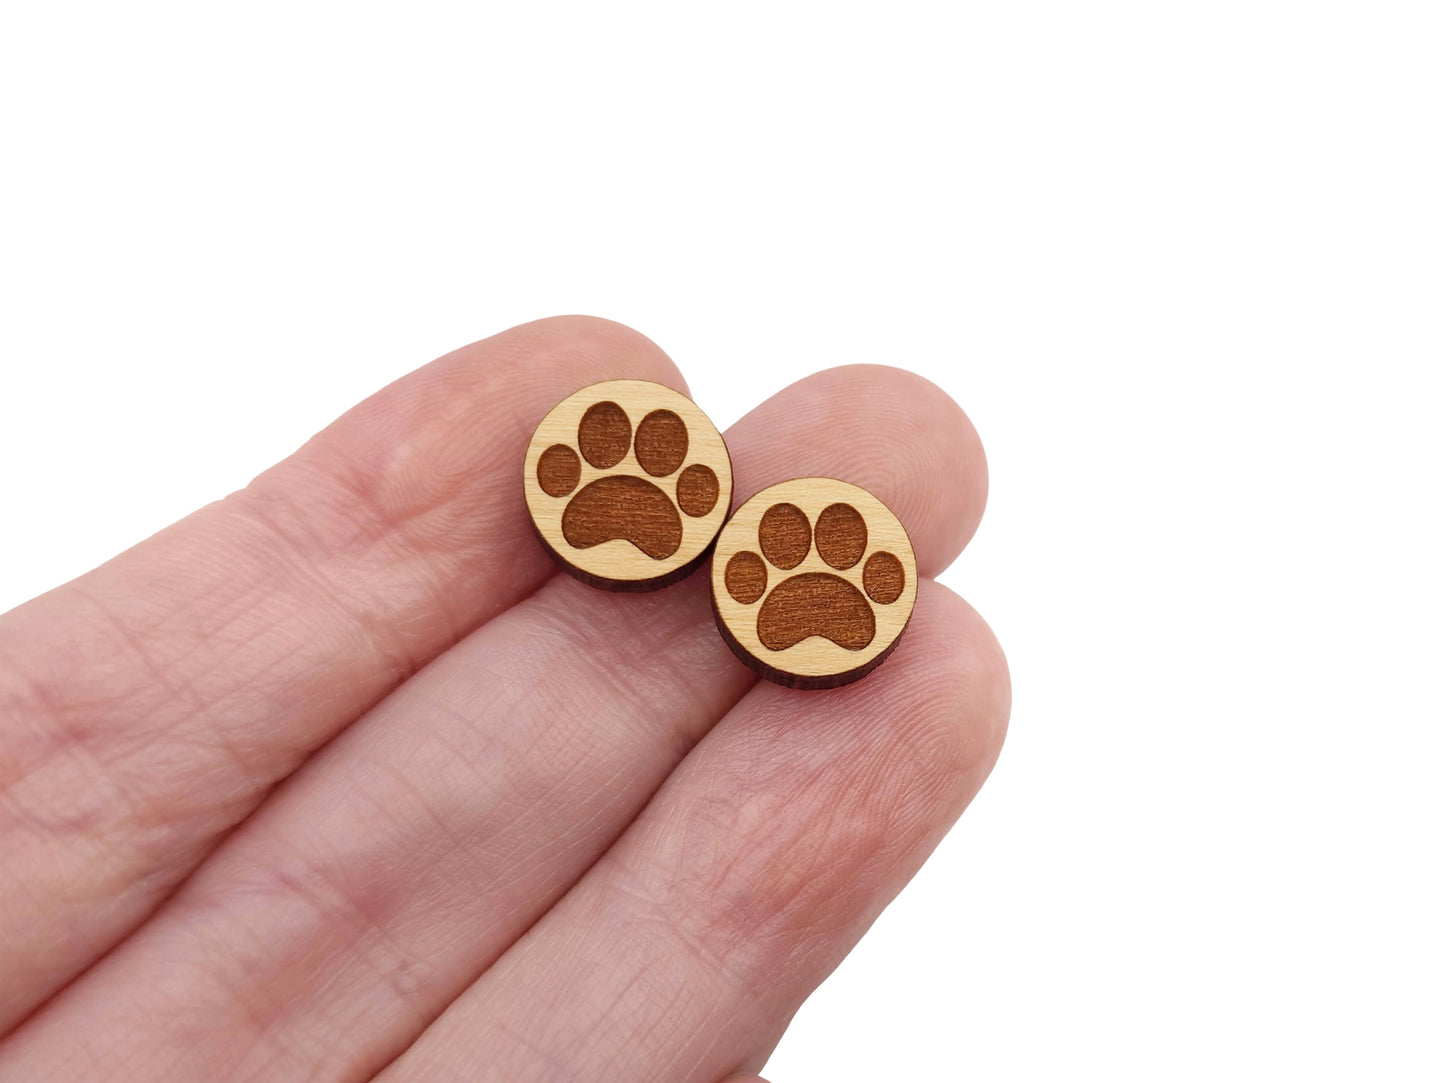 a hand holding a pair of round wooden cabochon earring blanks engraved with a paw print